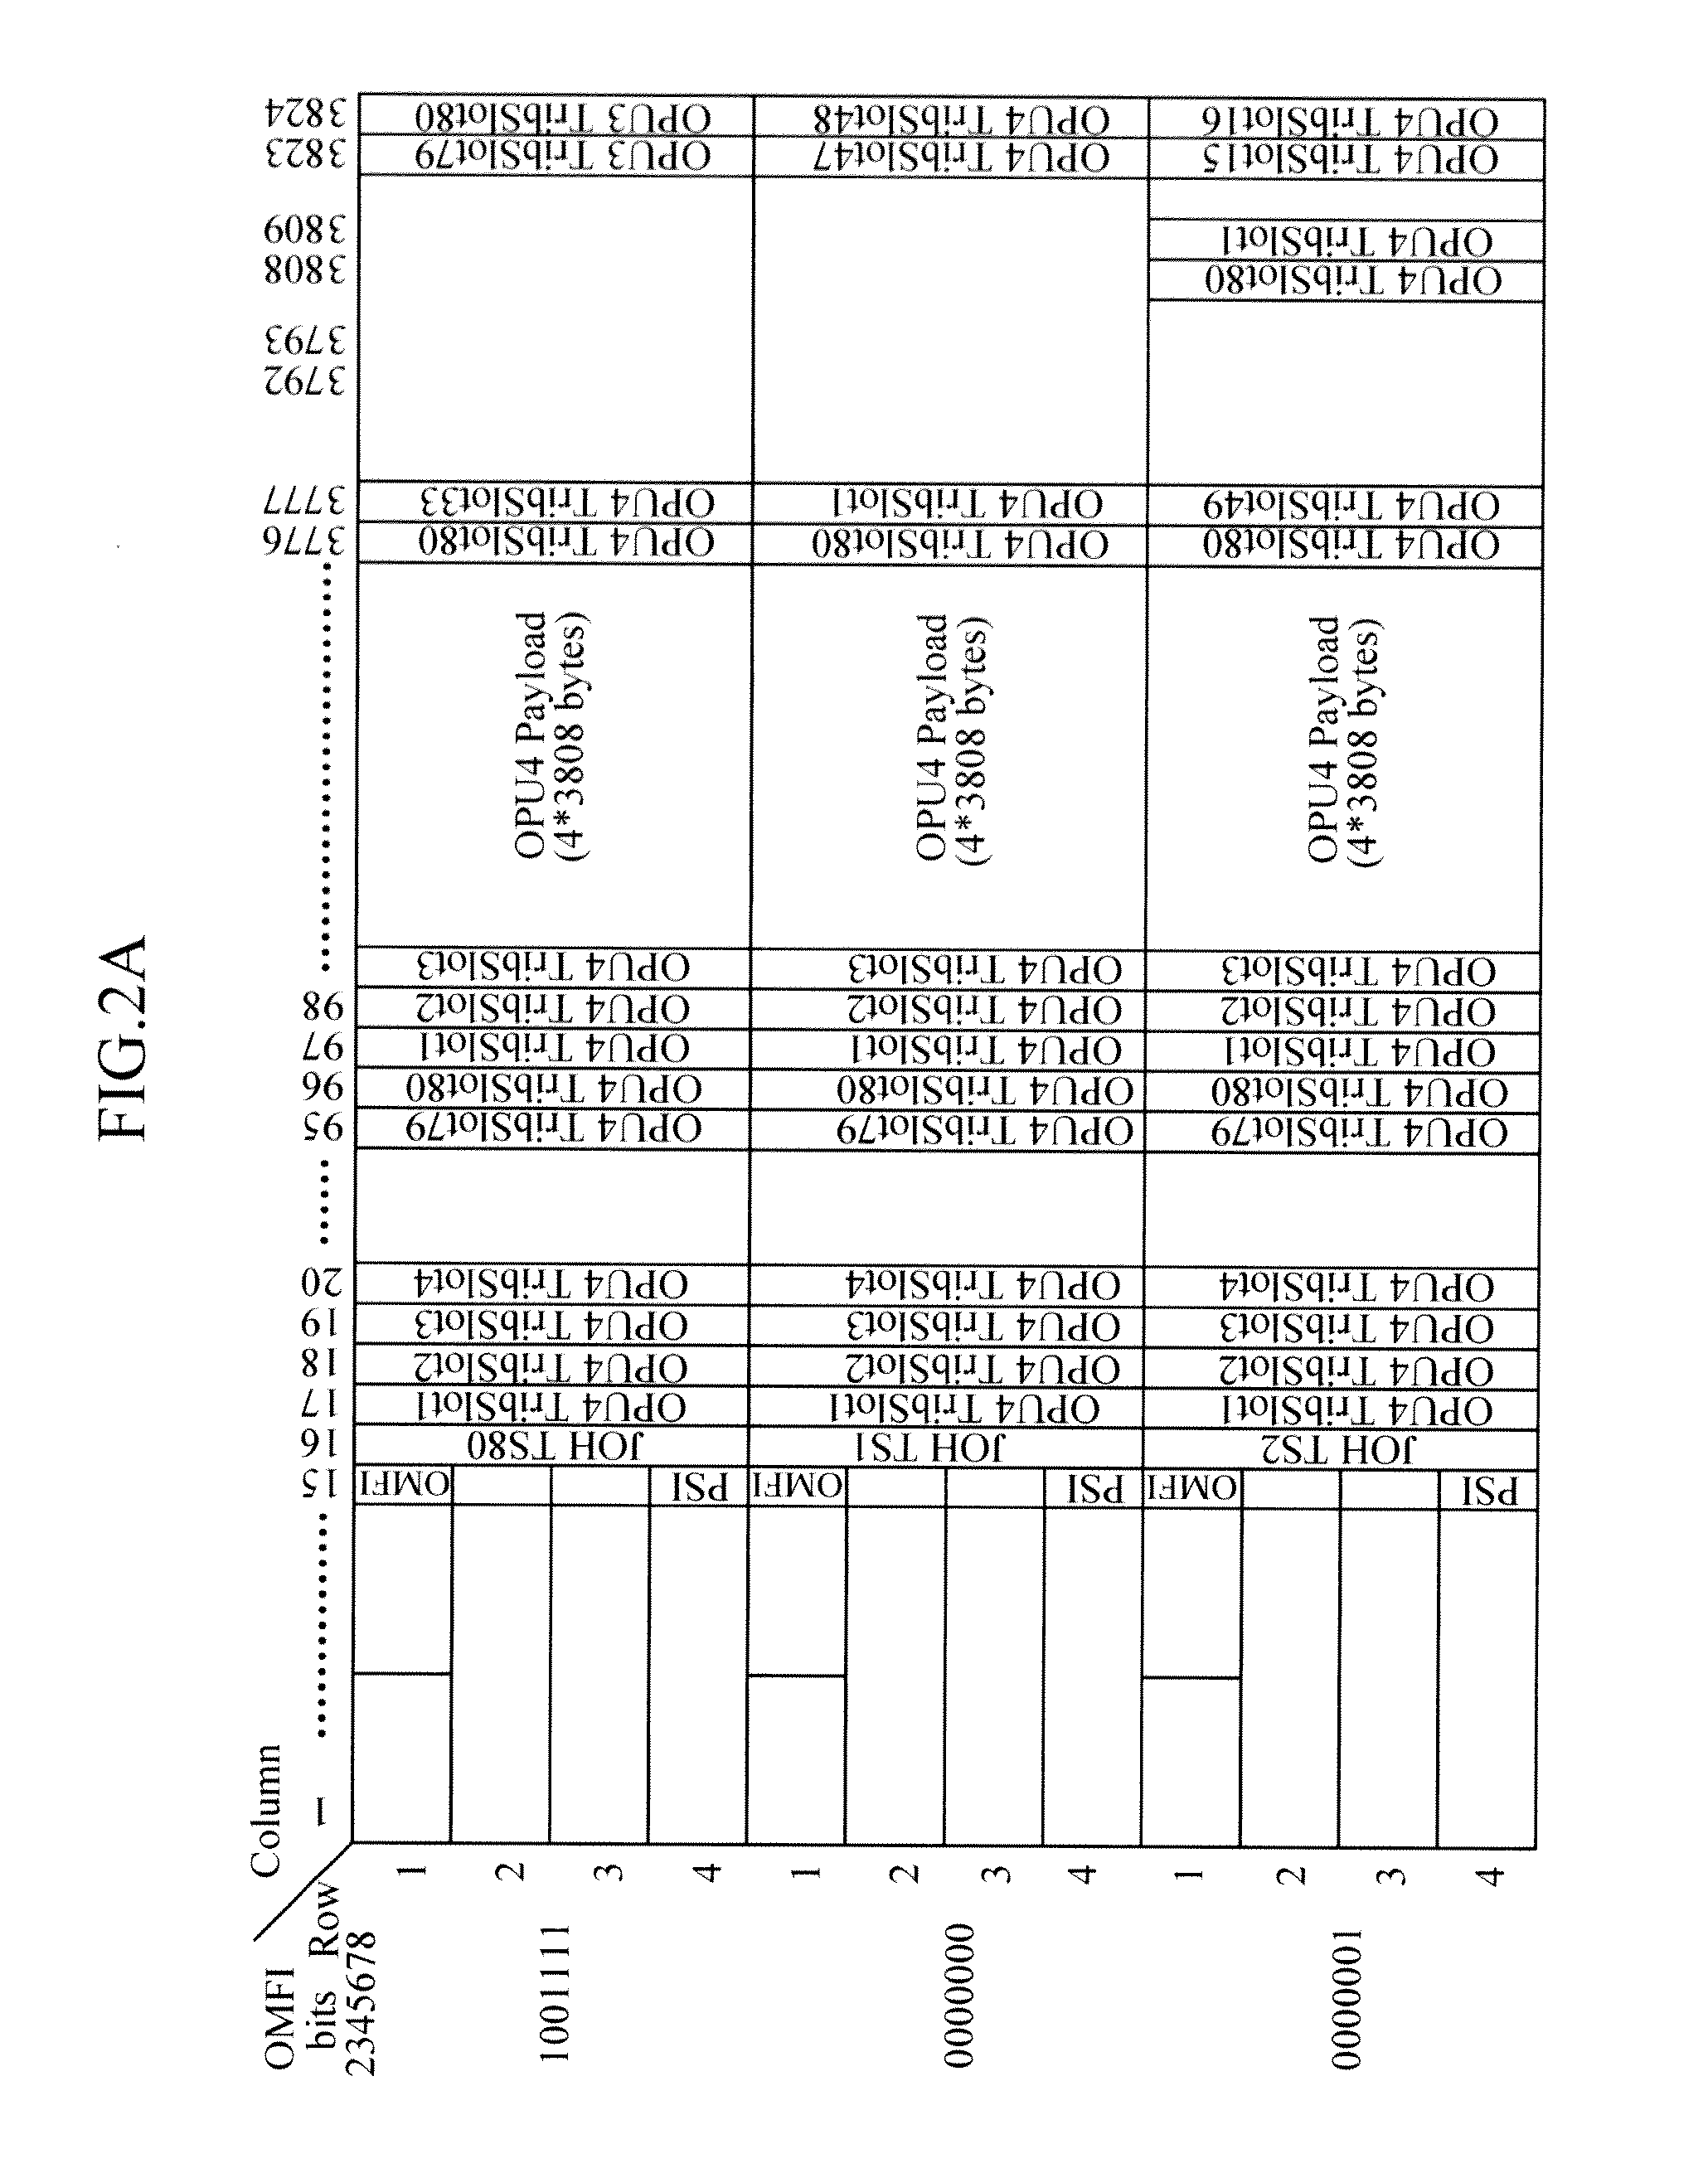 Apparatus suitable for transporting client signals, and apparatus and method suitable for mapping or demapping tributary slots for transport of client signals